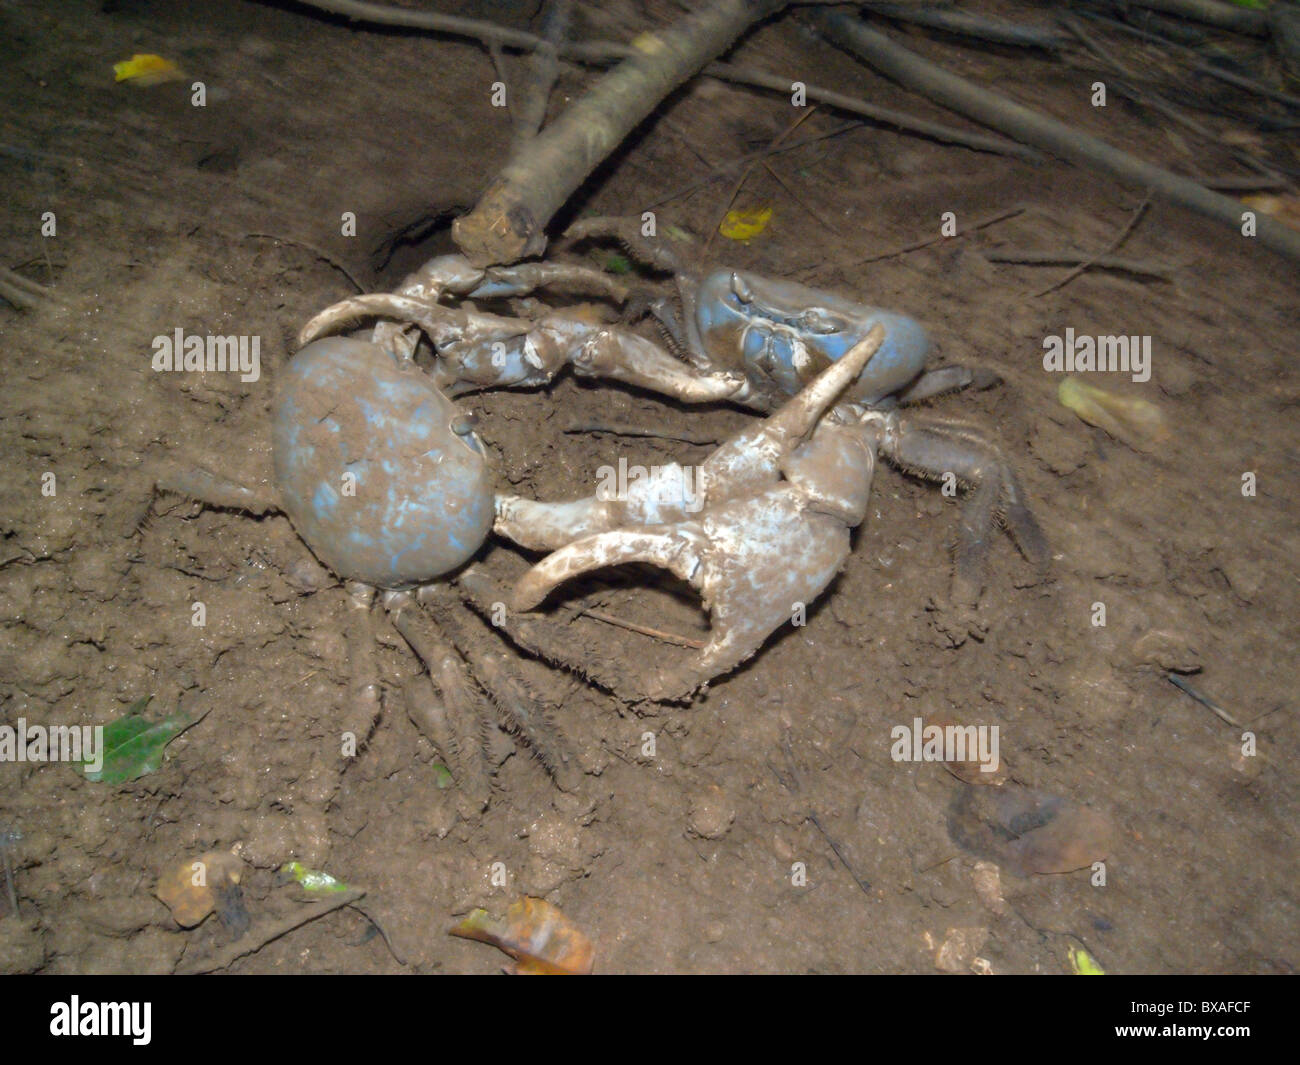 Two mud-covered blue crabs (Cardisoma hirtipes) fighting near burrow entrance, Christmas Island National Park, Indian Ocean Stock Photo